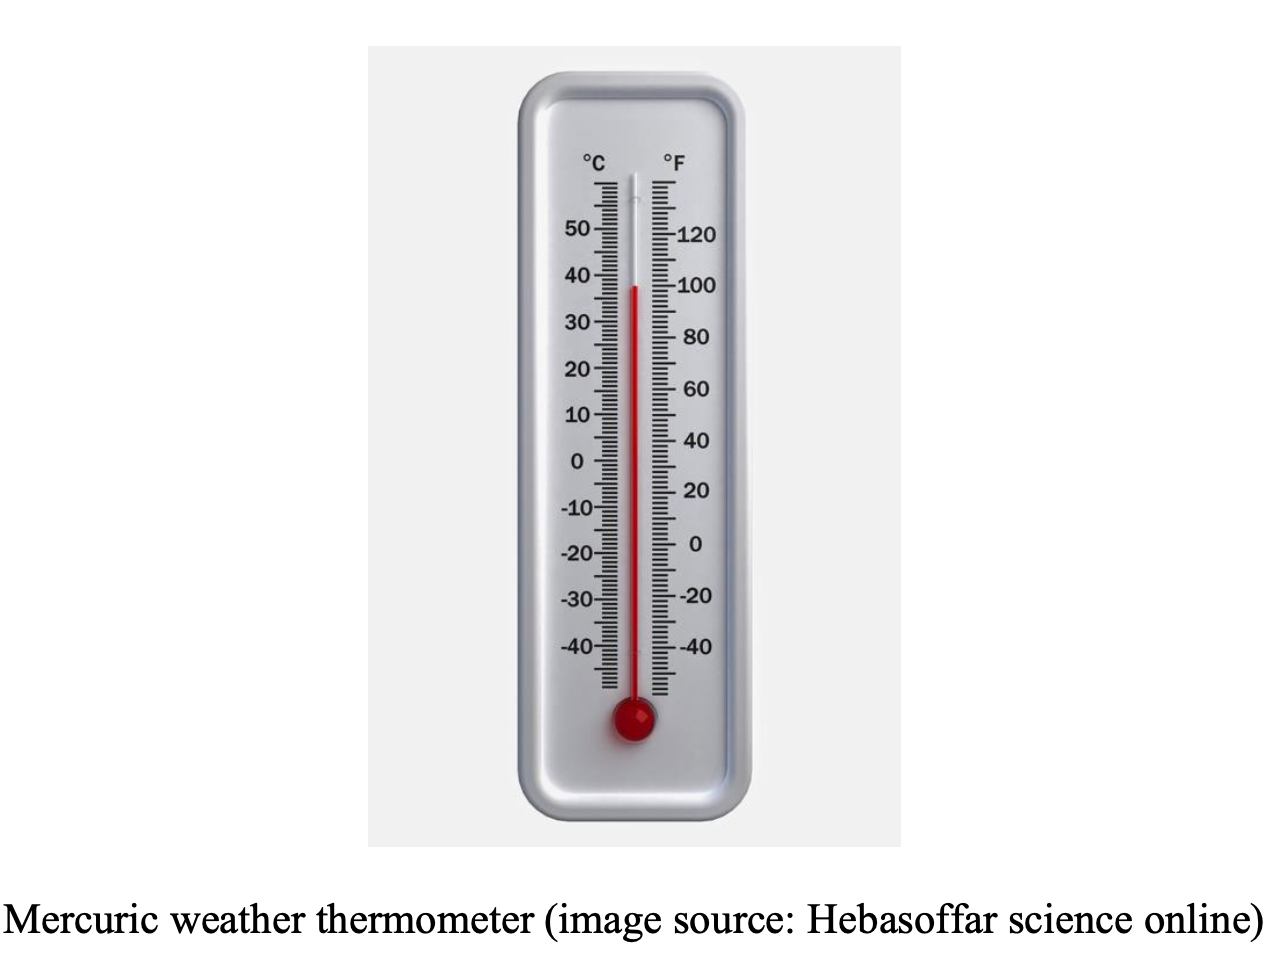 A mercuric weather thermometer.